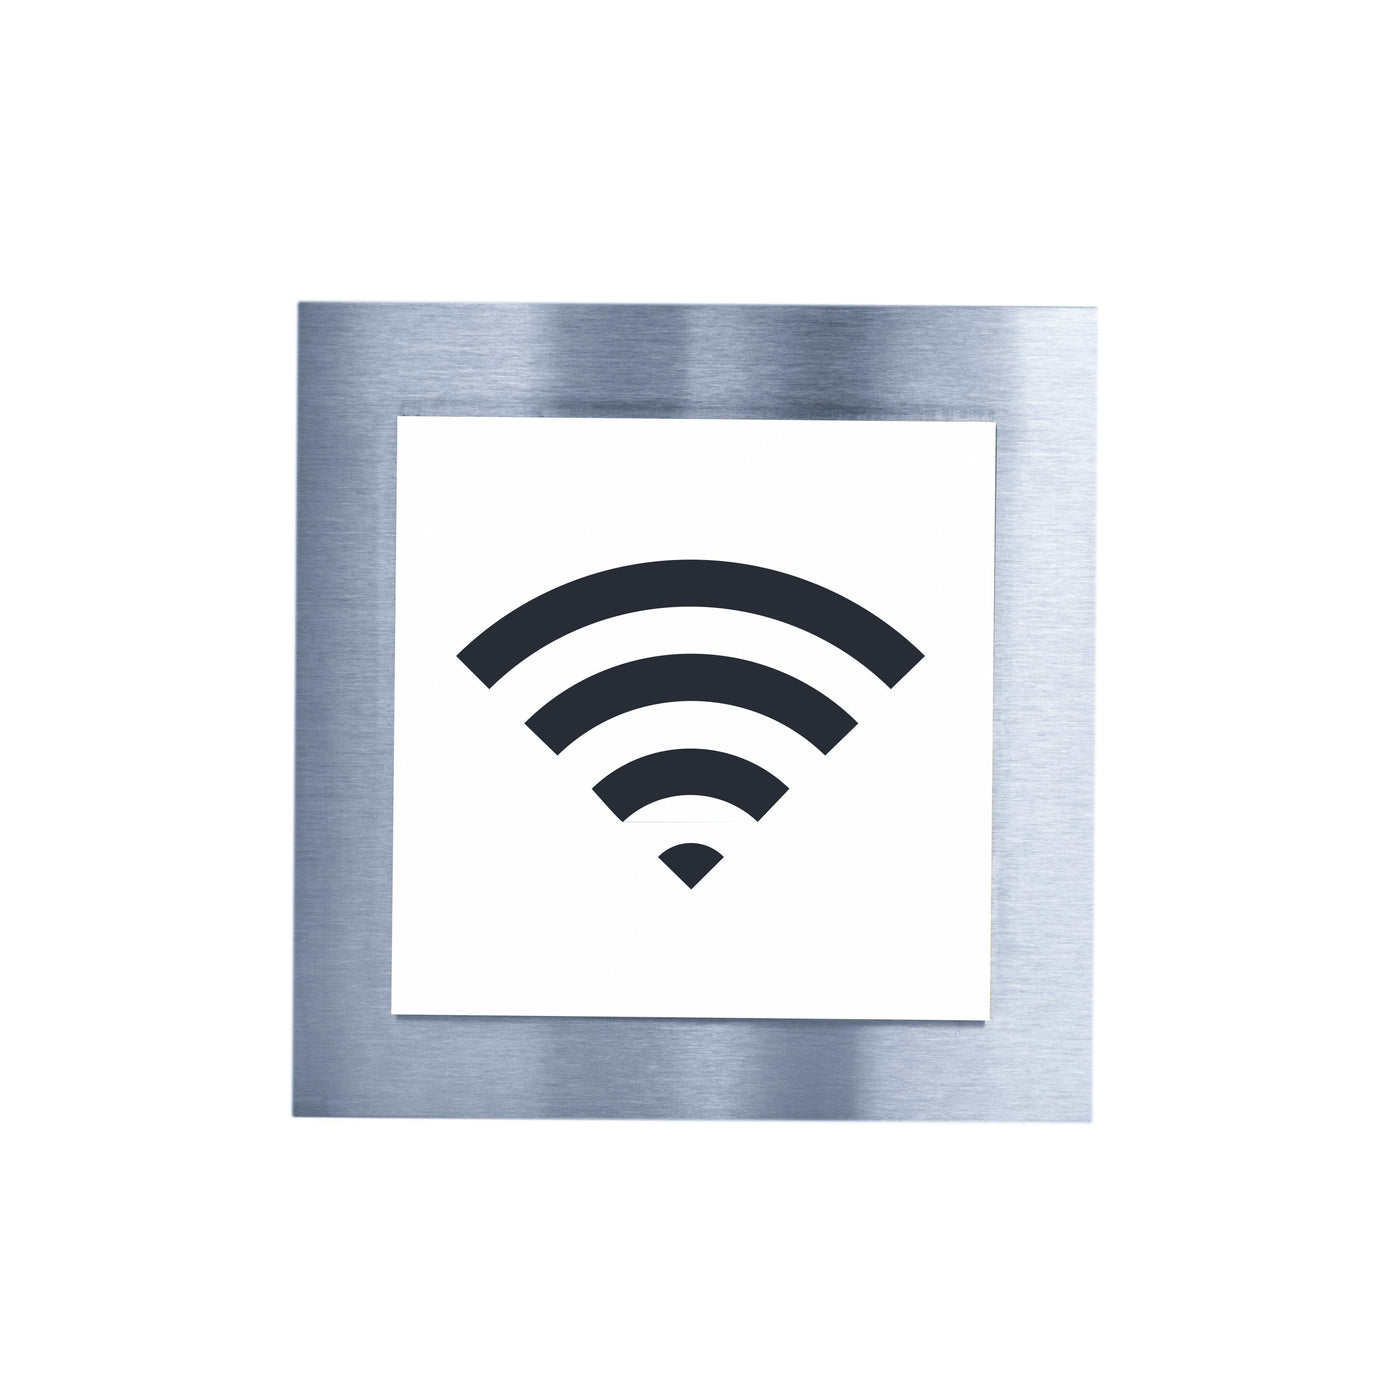 Wi-Fi Steel Wall Plate for Office Information signs white / black pictogram Bsign